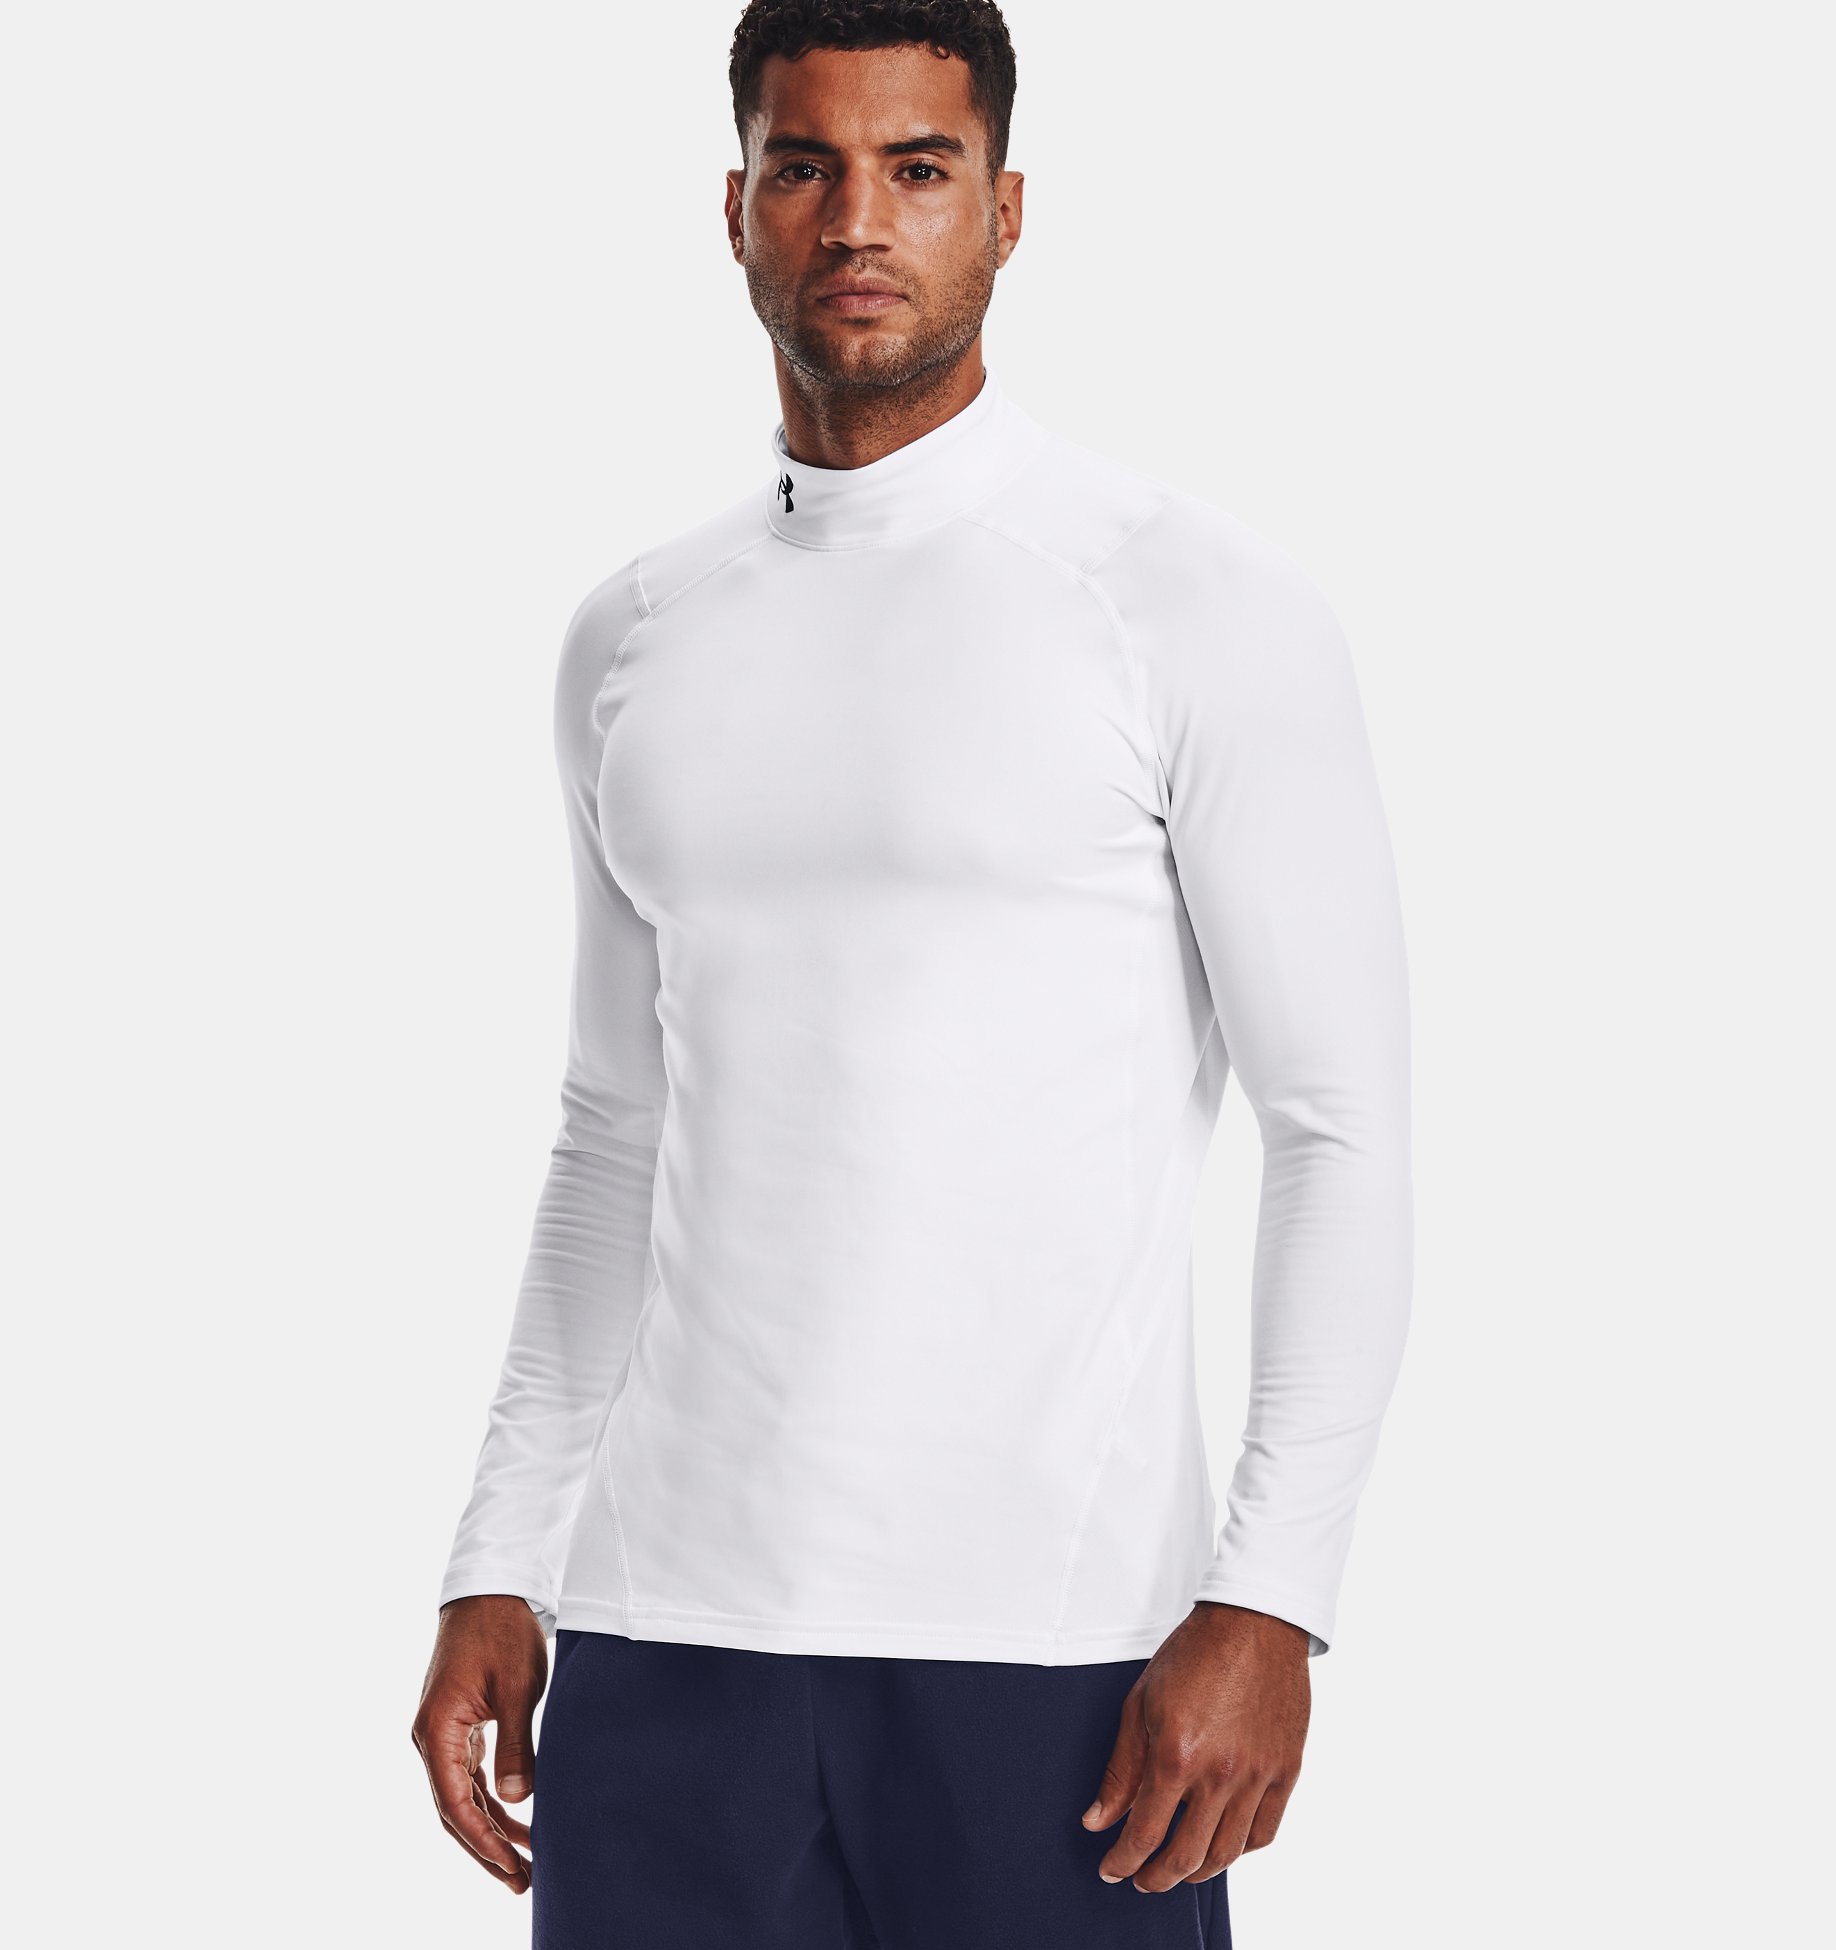 Underarmour Mens ColdGear Fitted Mock